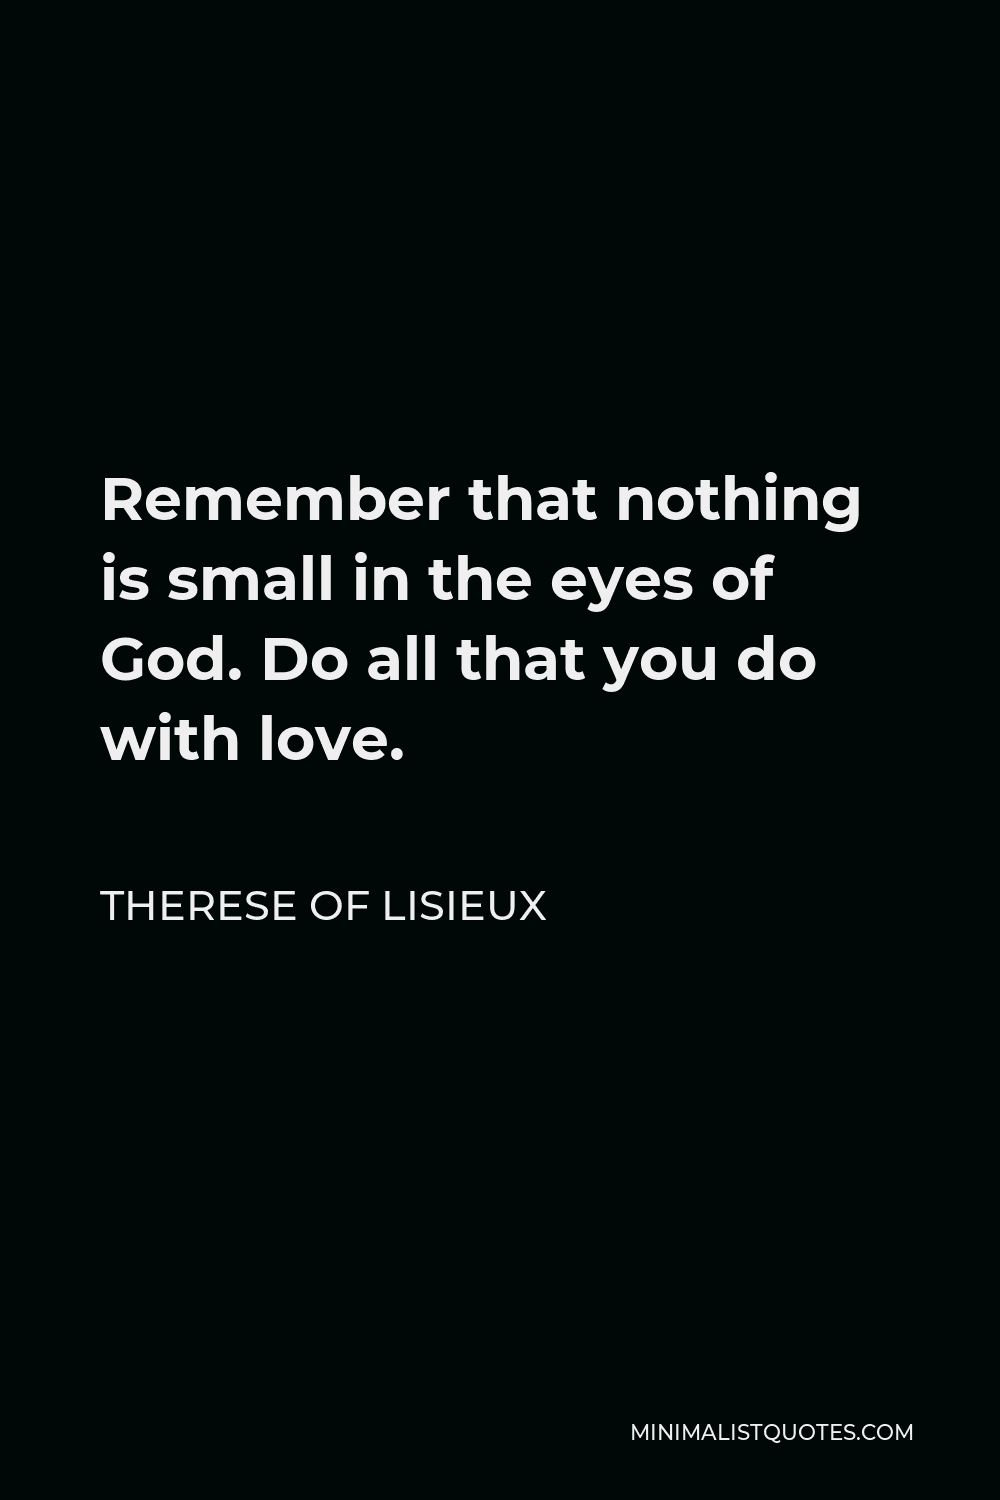 Therese of Lisieux Quote - Remember that nothing is small in the eyes of God. Do all that you do with love.